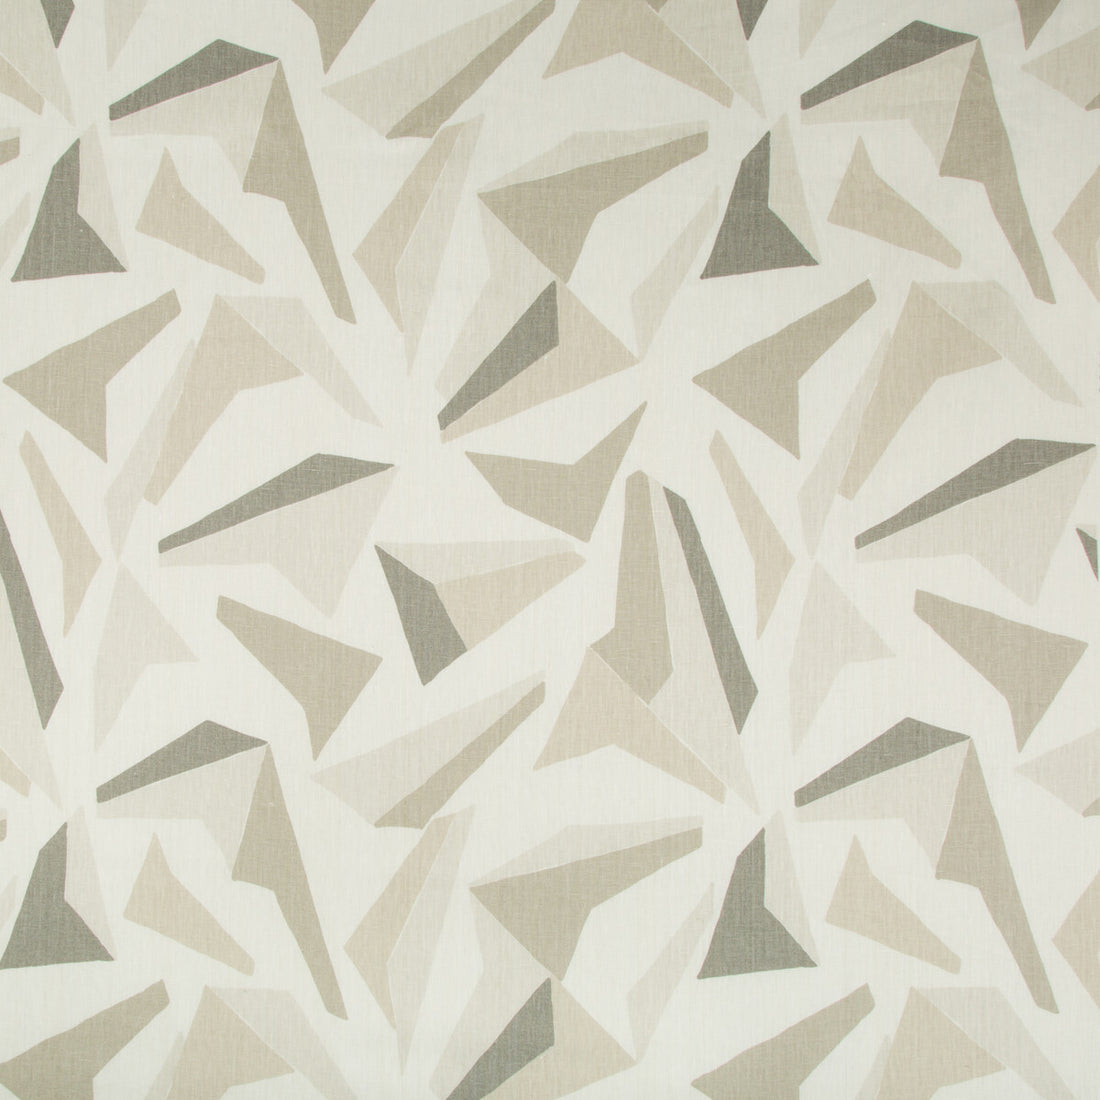 Flock fabric in linen color - pattern FLOCK.16.0 - by Kravet Basics in the Thom Filicia Altitude collection